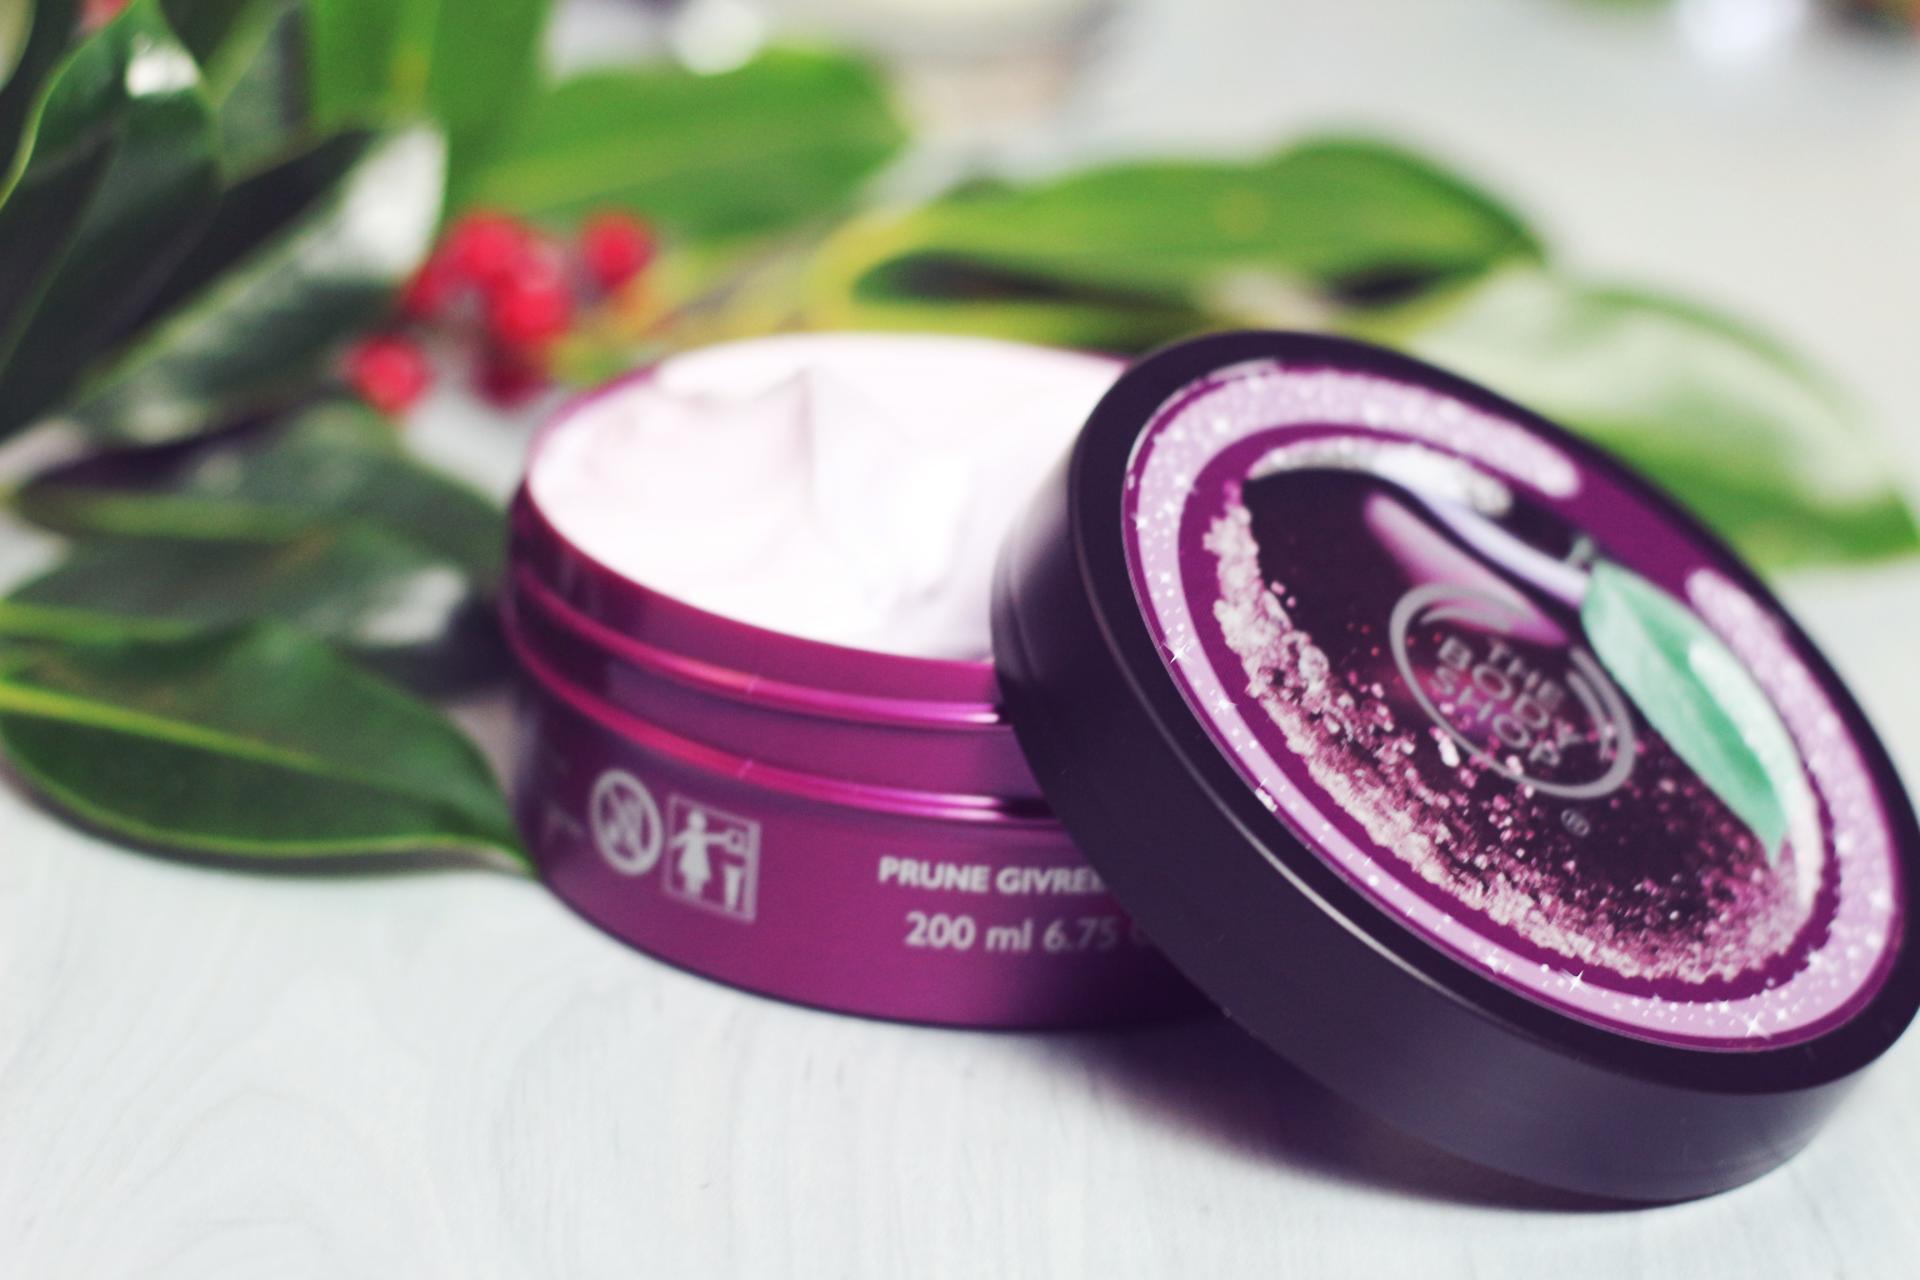 The body shop frosted plum body butter